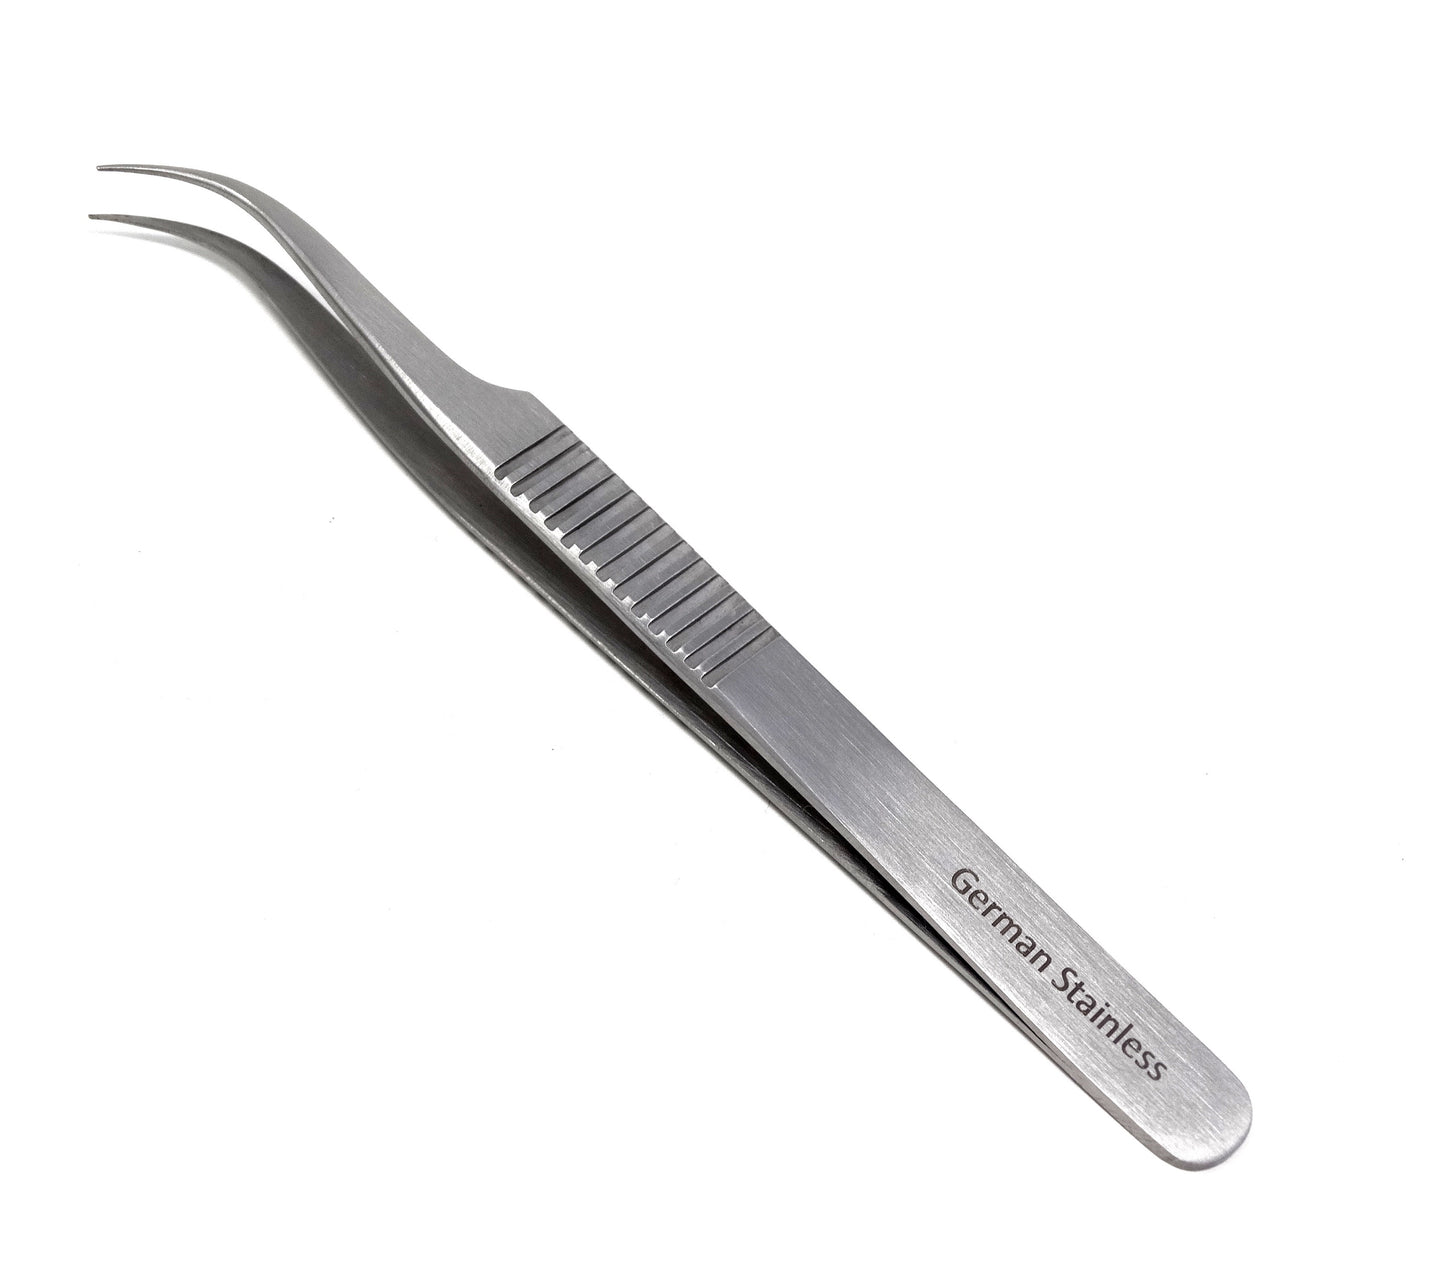 Stainless Steel Micro Surgical Forceps Tweezers Strong Curved, Ridged Handle, Premium Quality